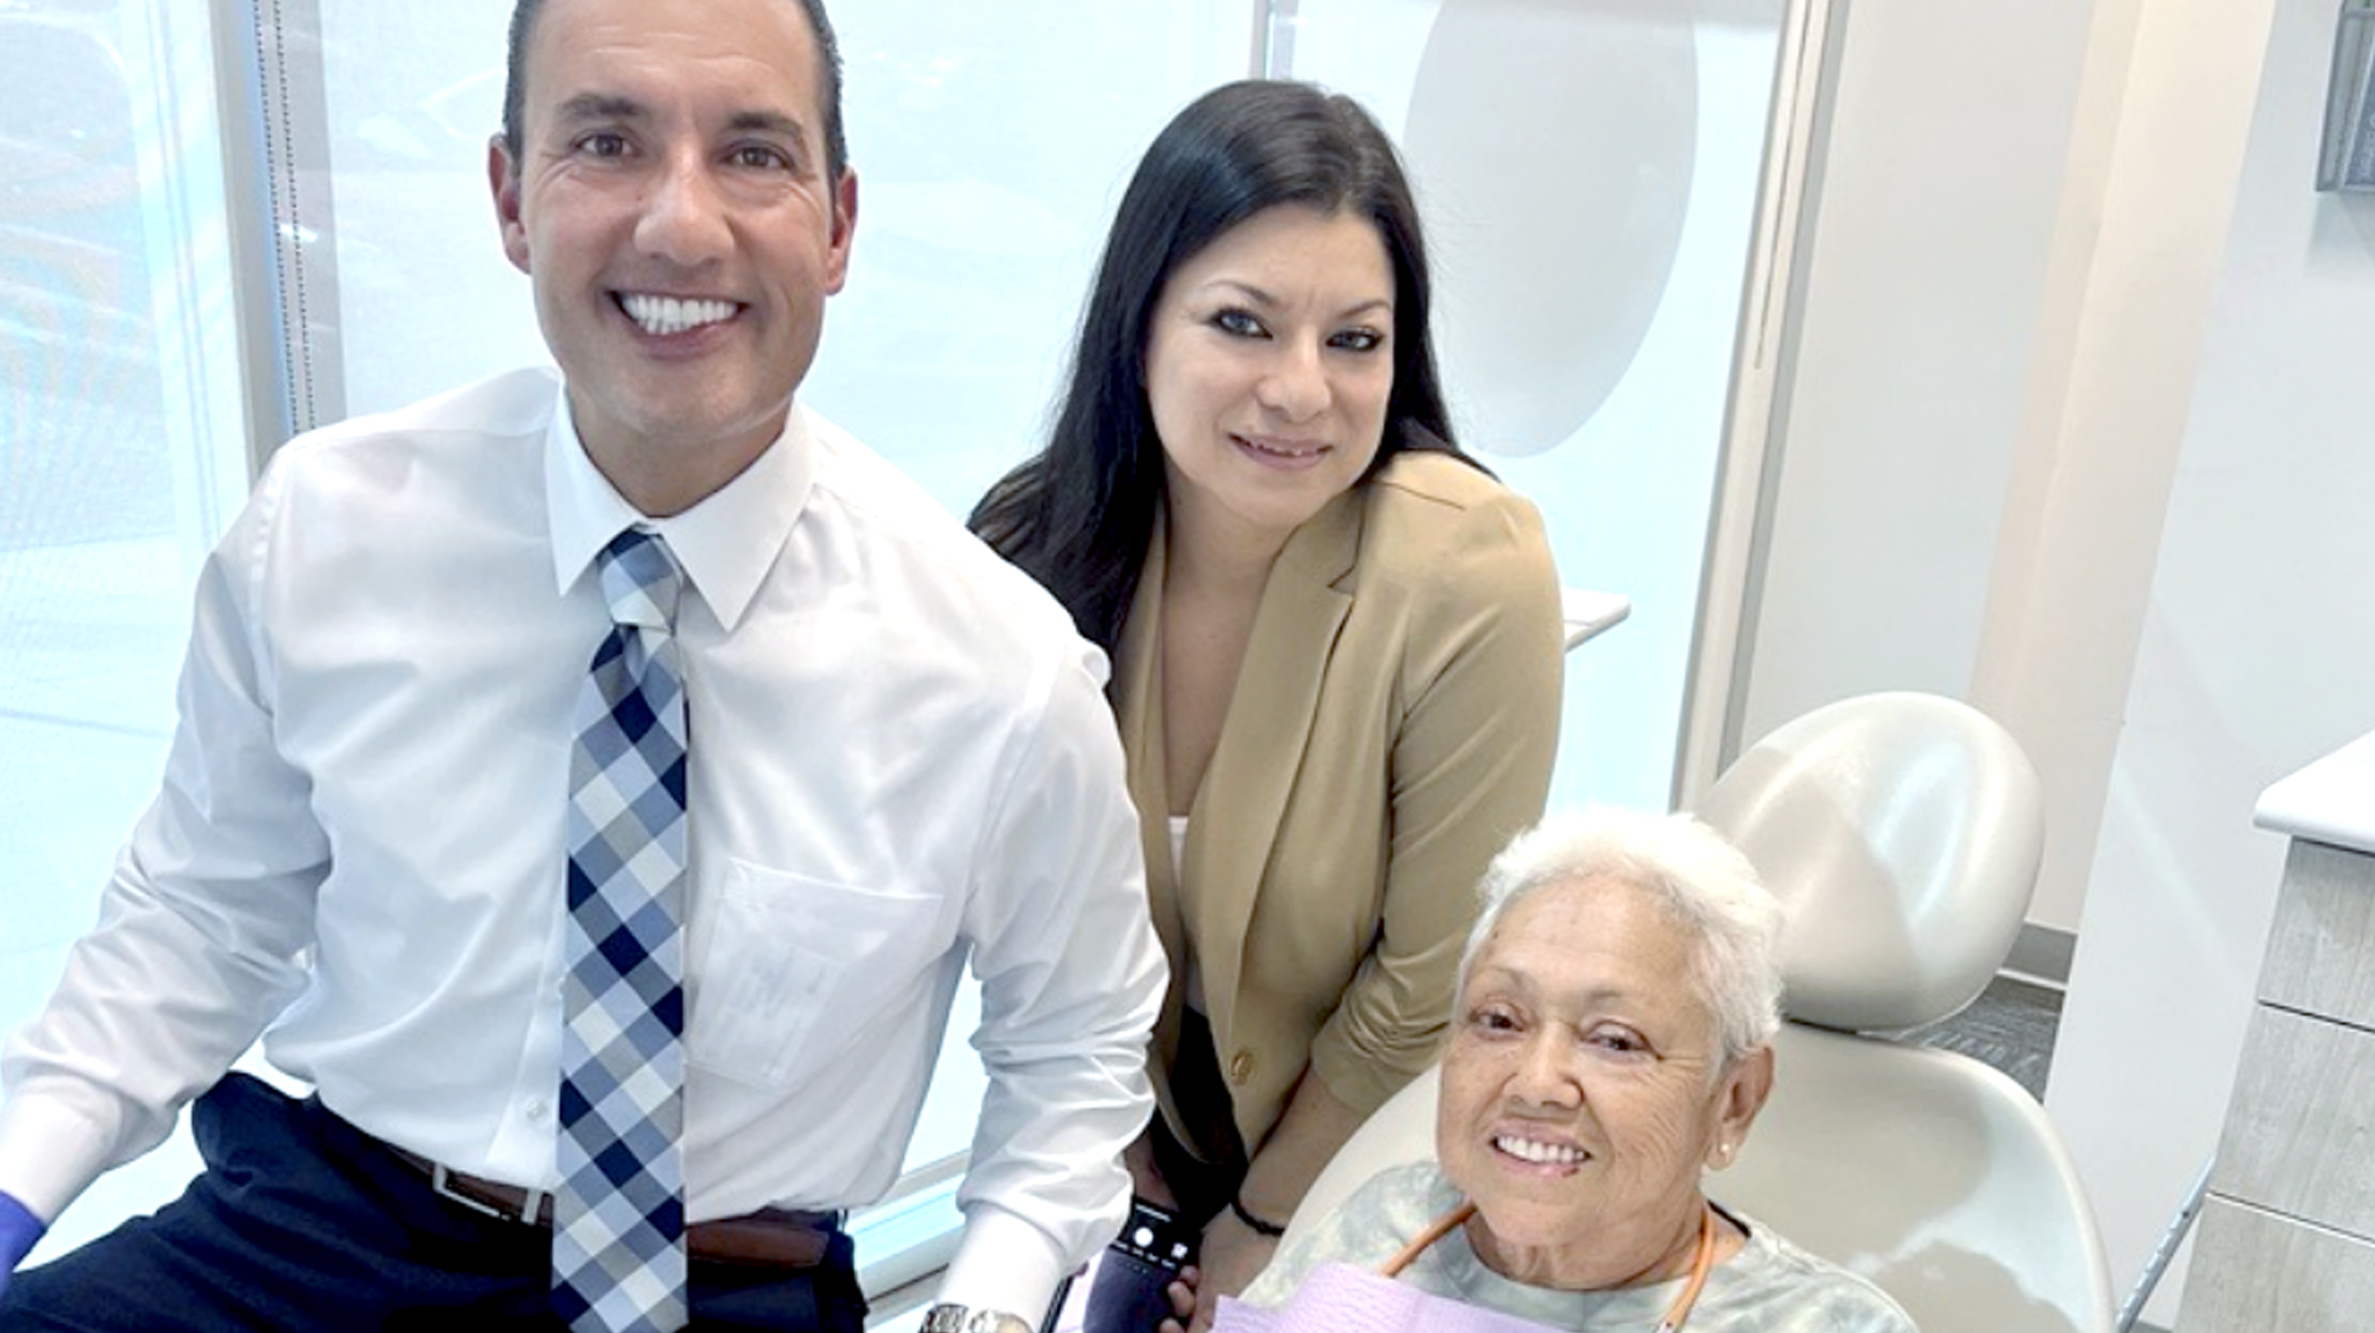 Our team provided same-day completion that resulted in this patient's revitalized smile line.